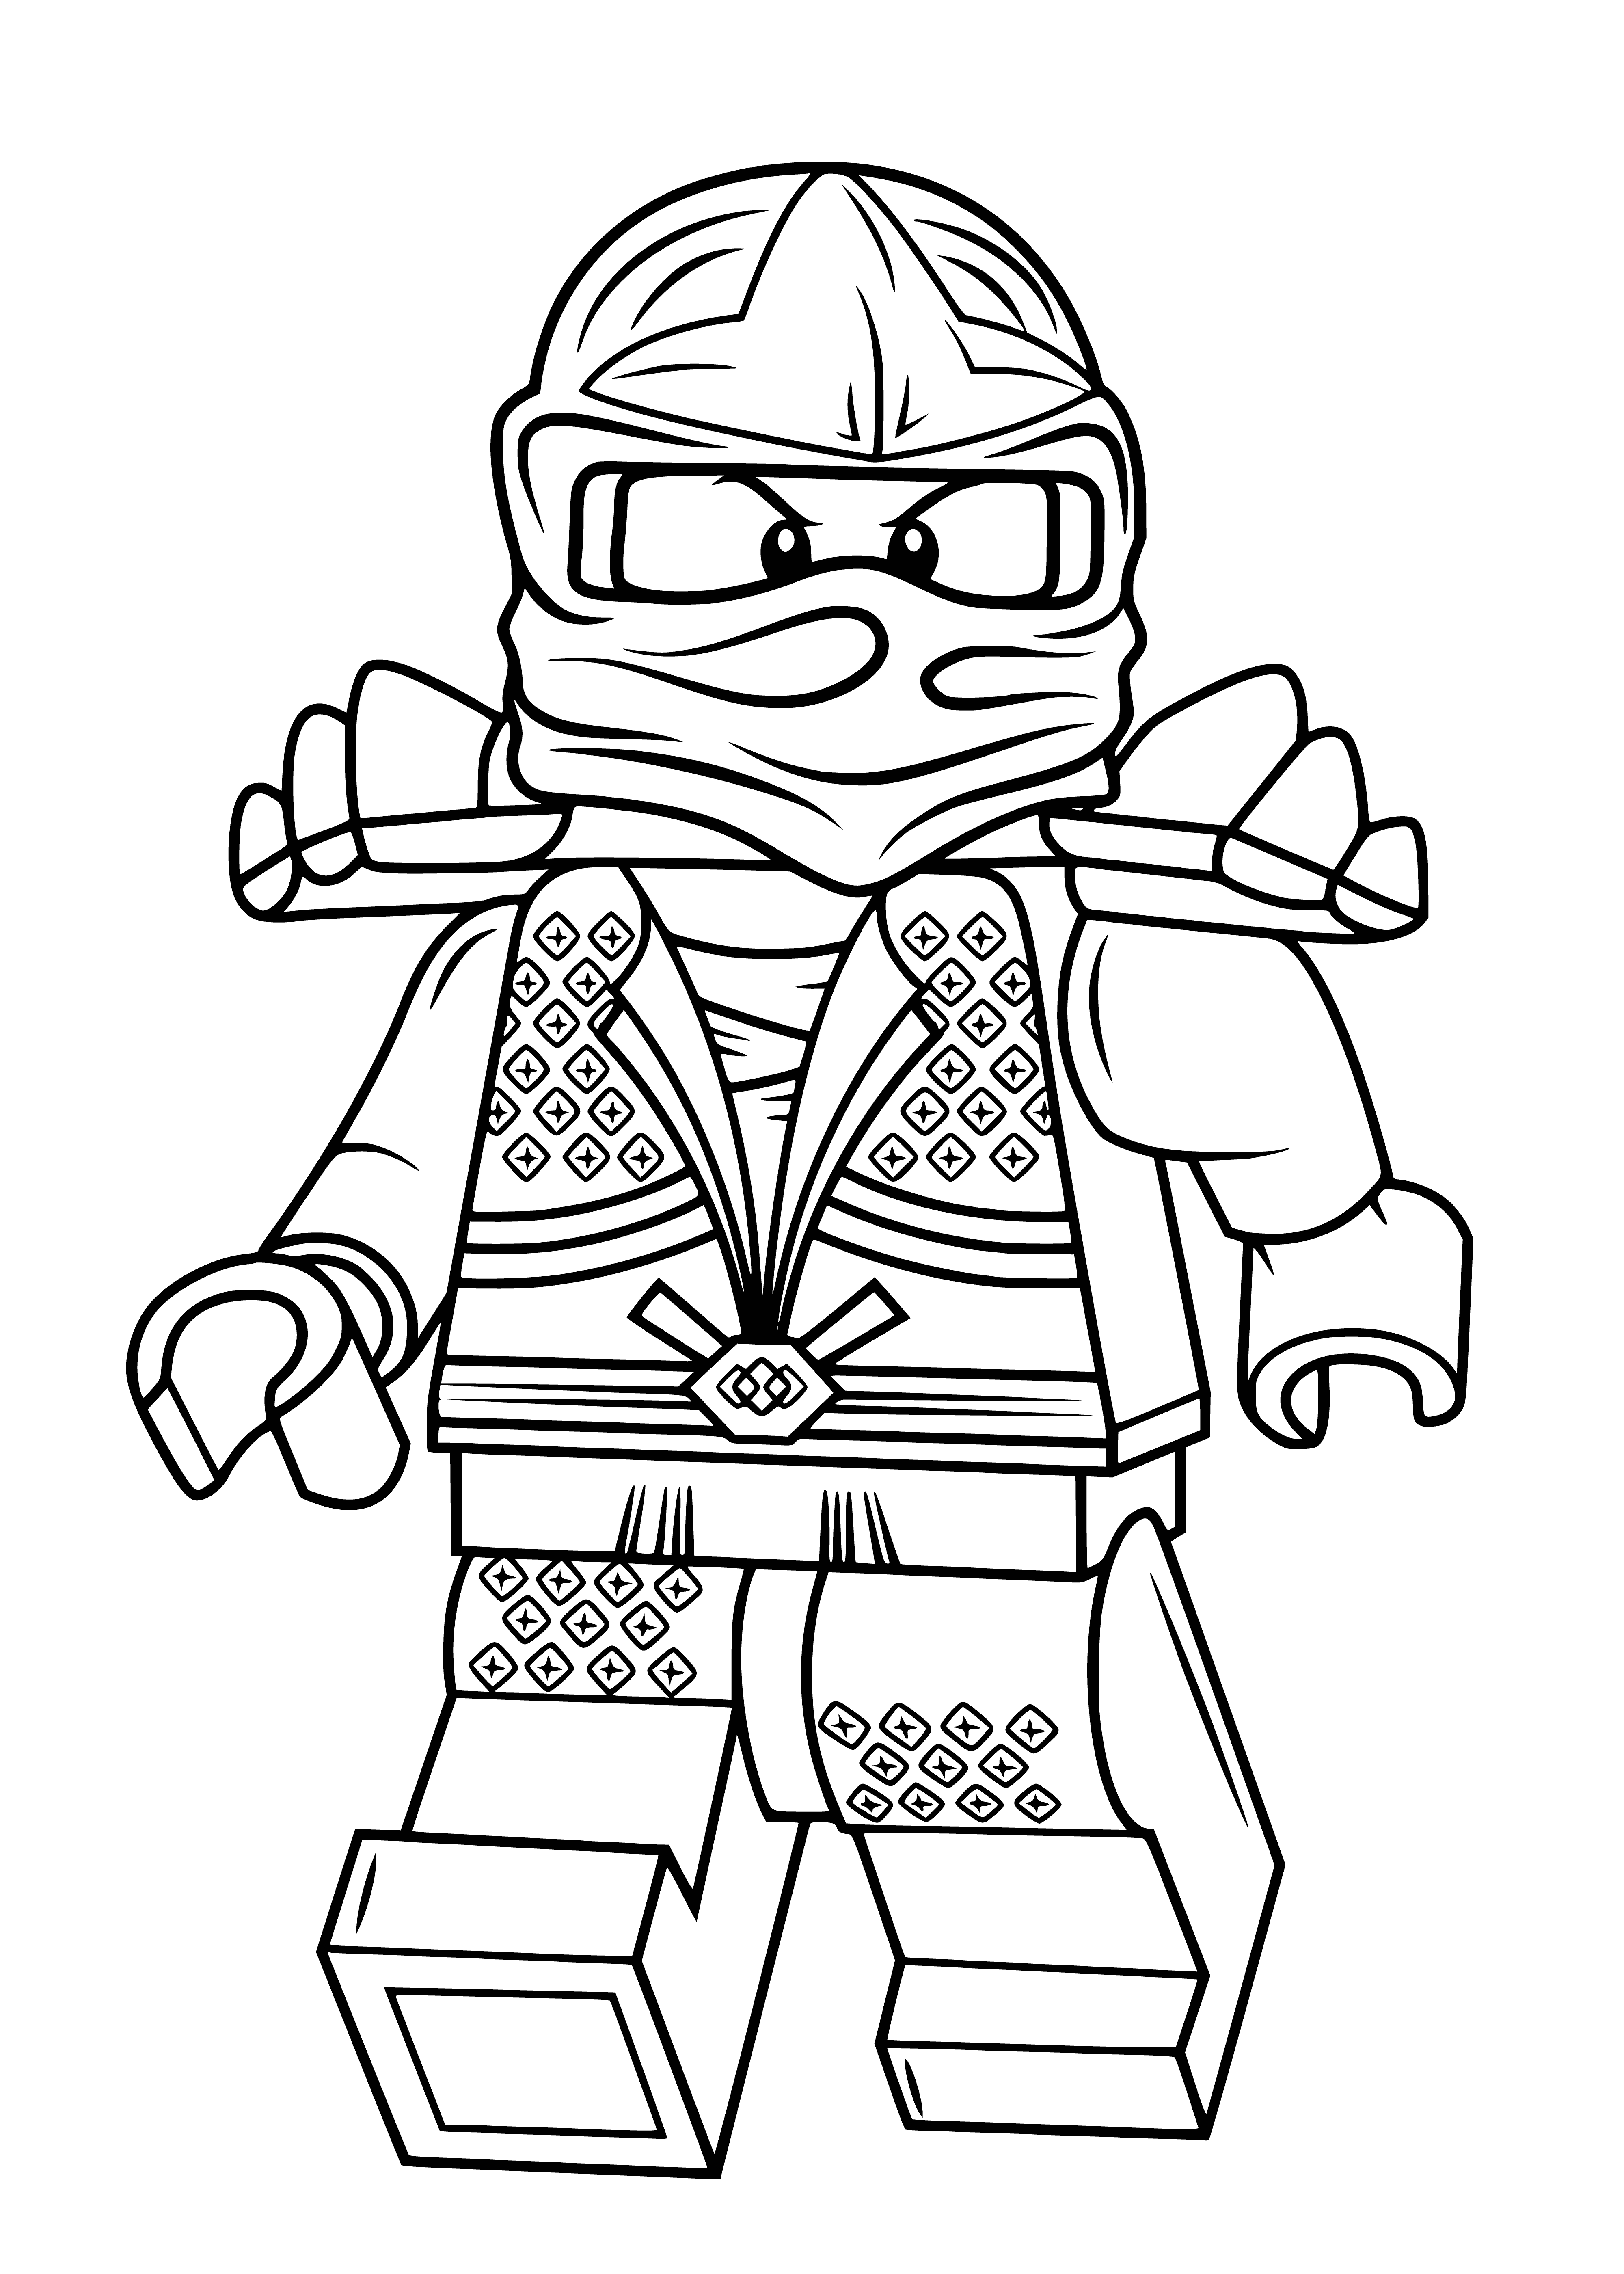 Lloyd Zx coloring page